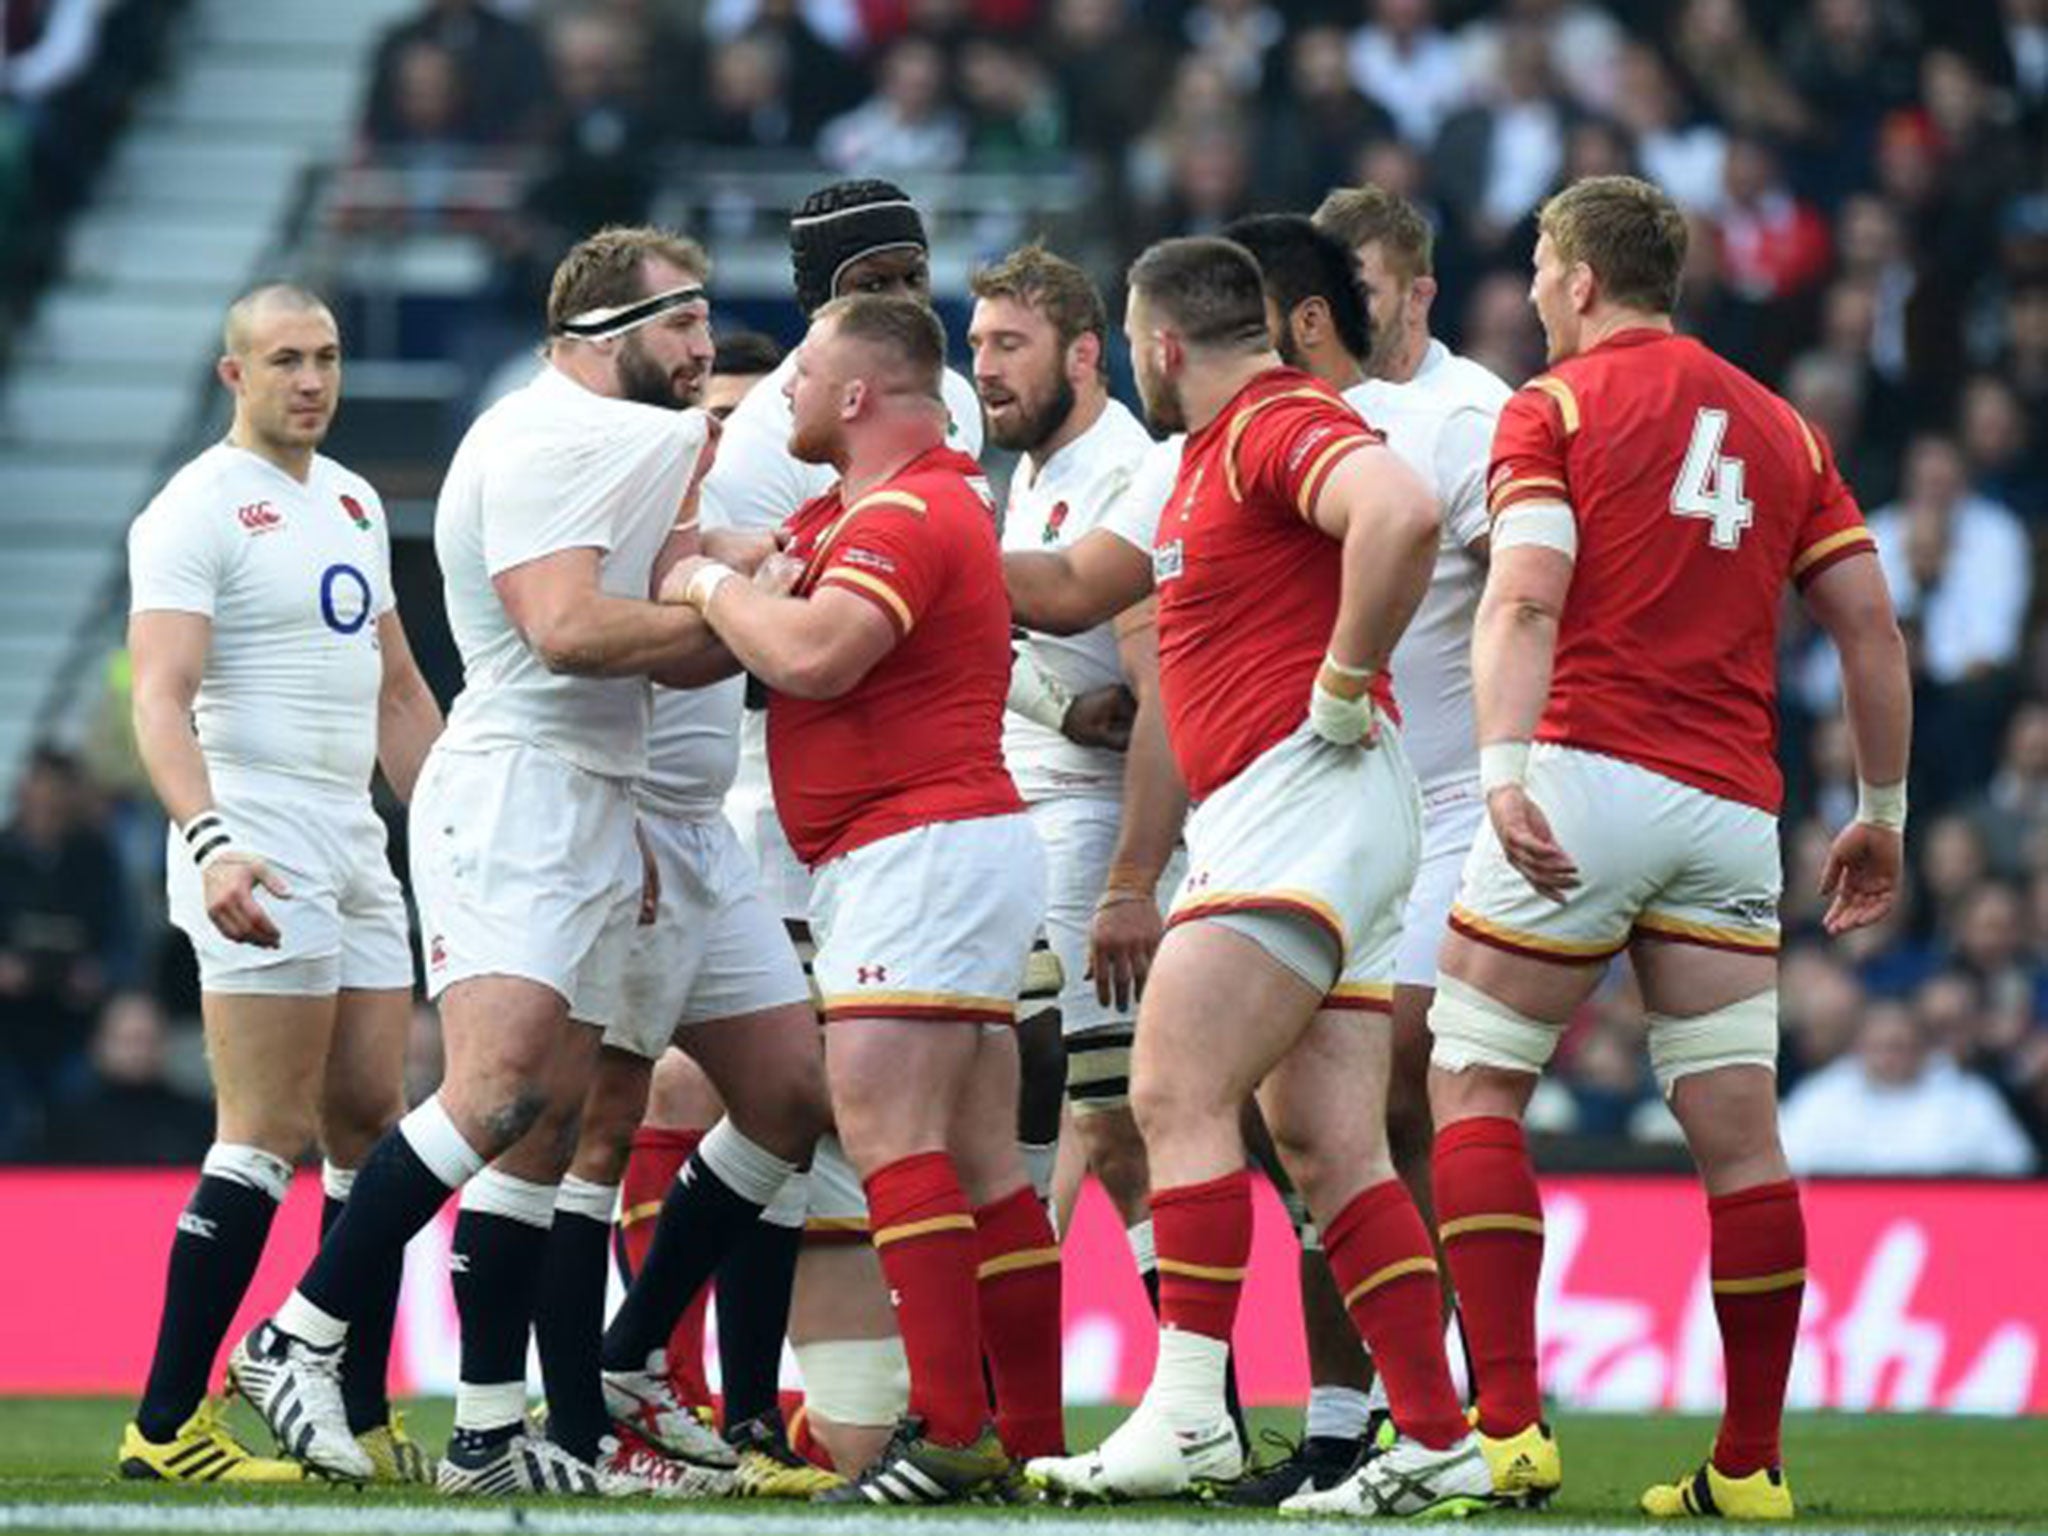 Joe Marler, left, and Wales’ Samson Lee get up close and personal on Saturday